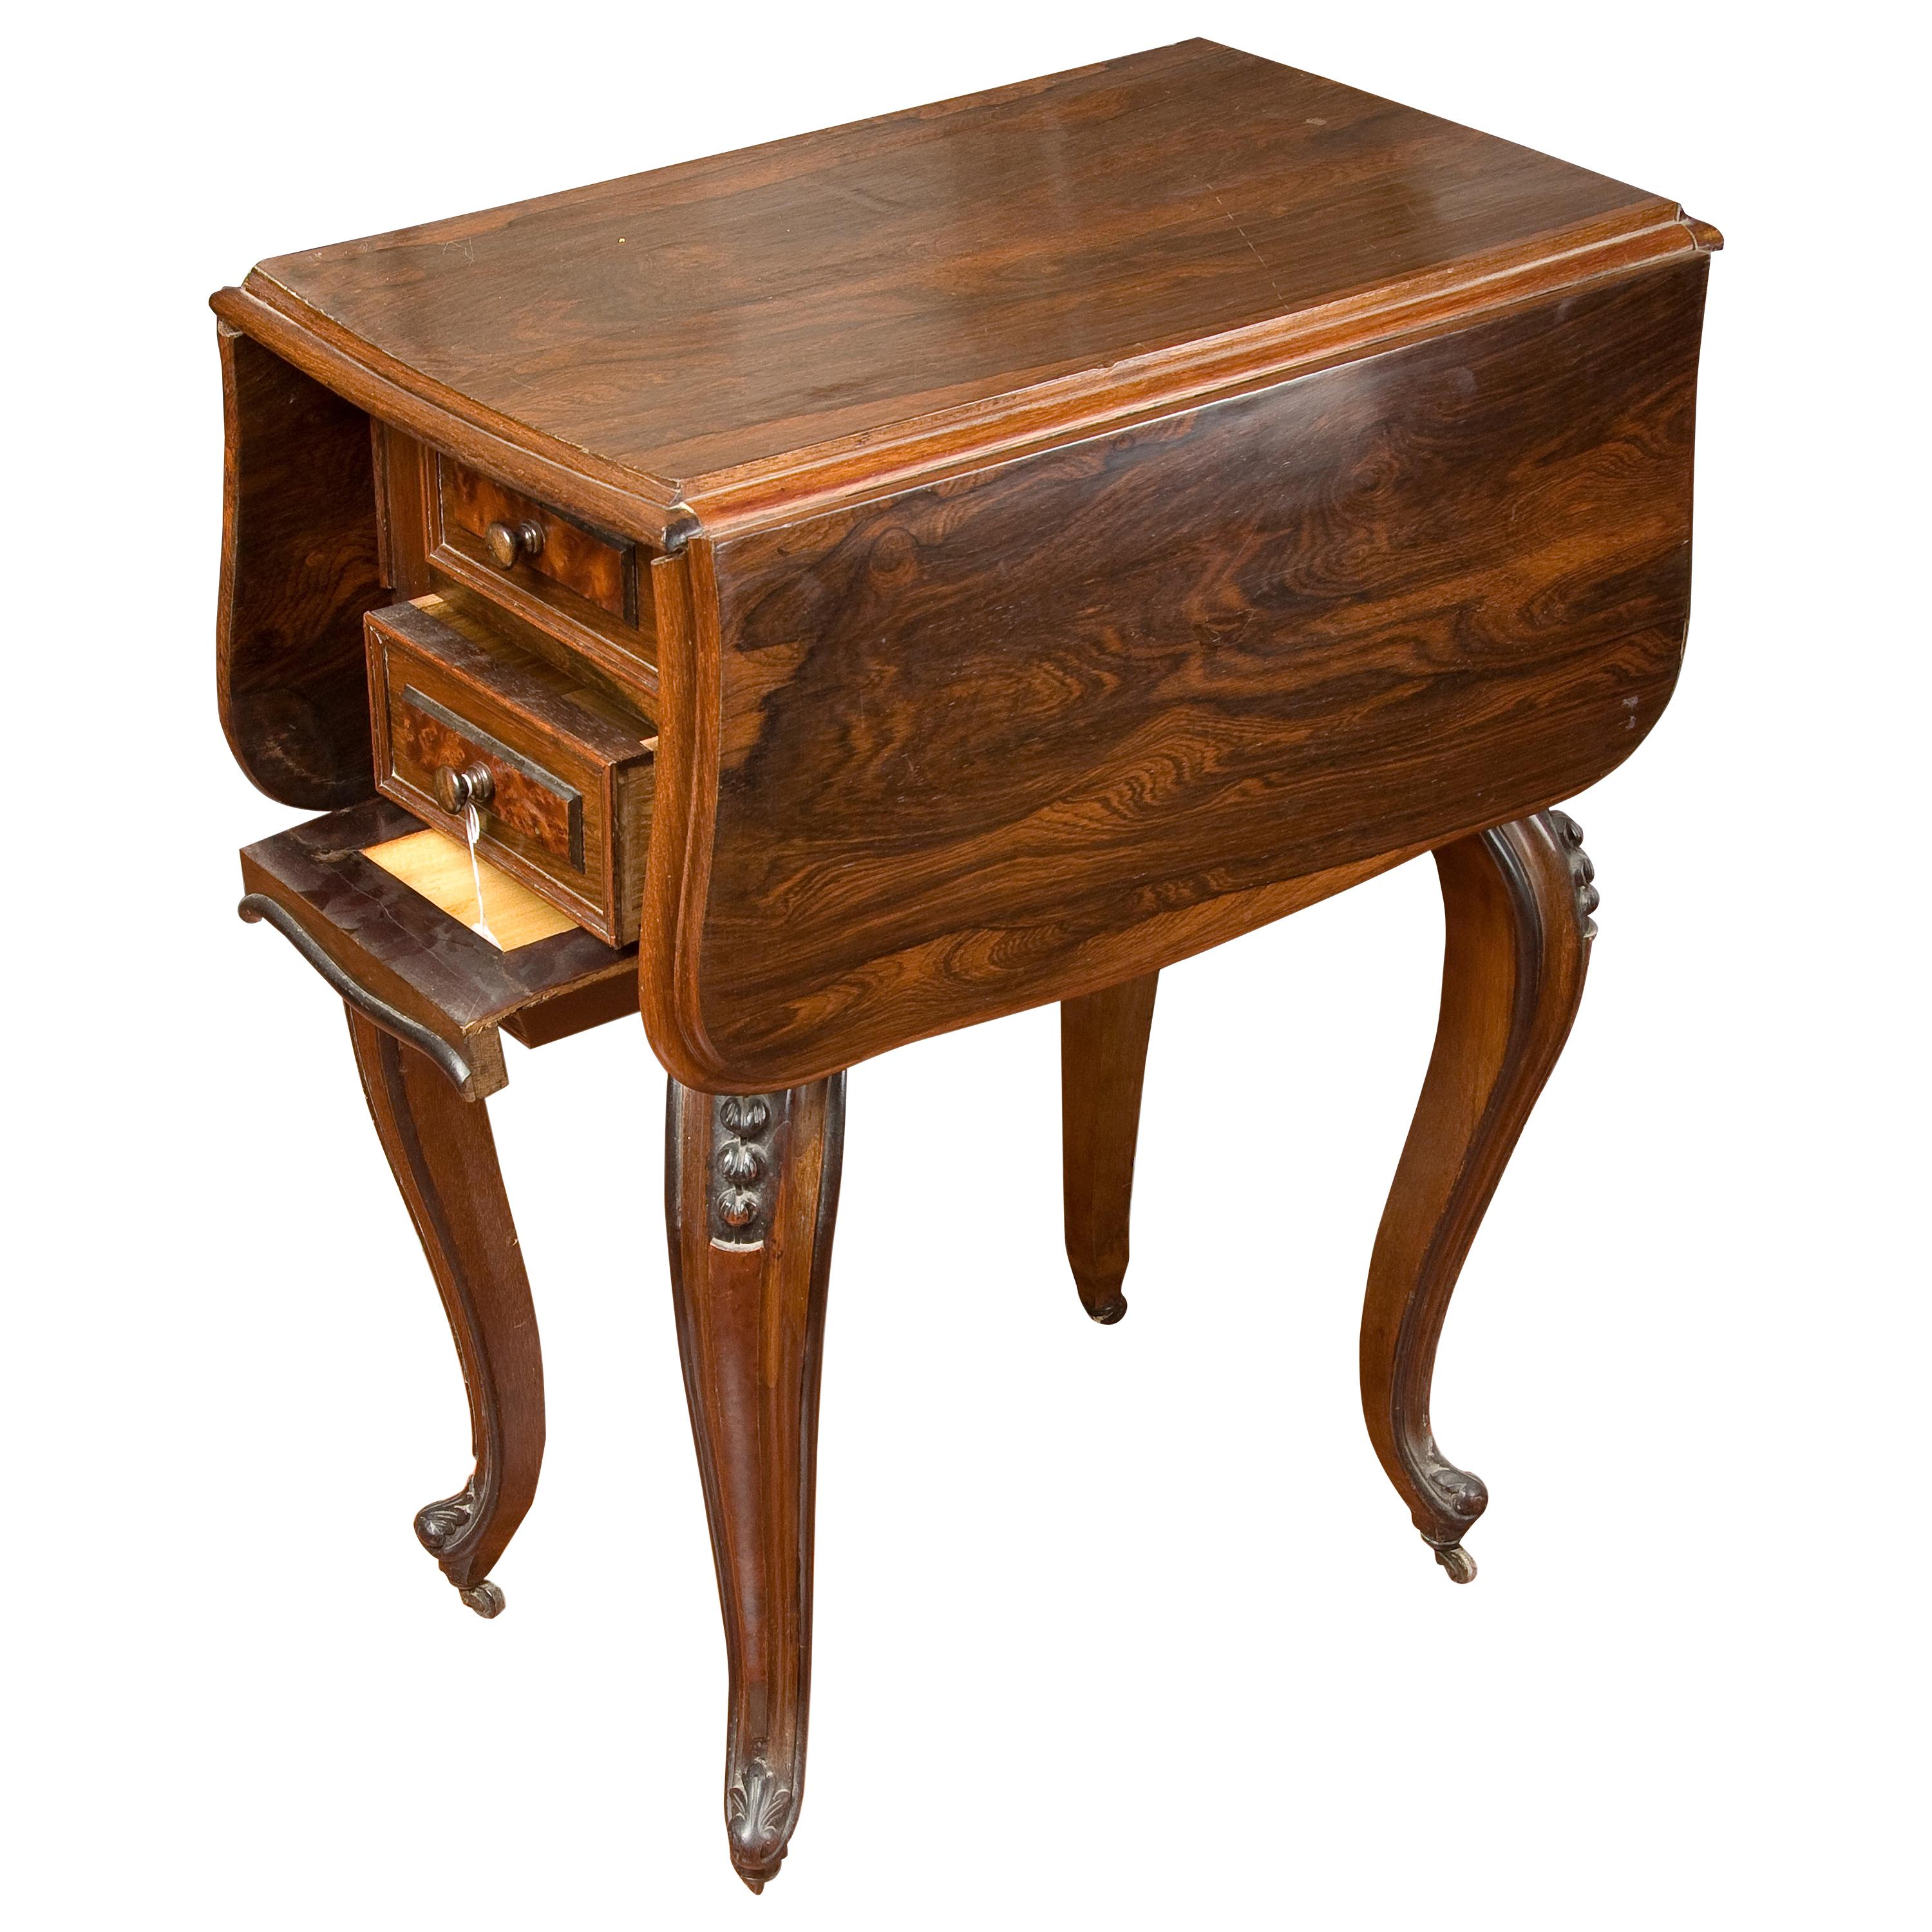 Rosewood sewing table with wings, 19th century.
Narrow coffee table with two folding wings supported on four cabriolet legs decorated with carved vegetable garlands and metal casters. The front features two drawers and a removable table. The purity